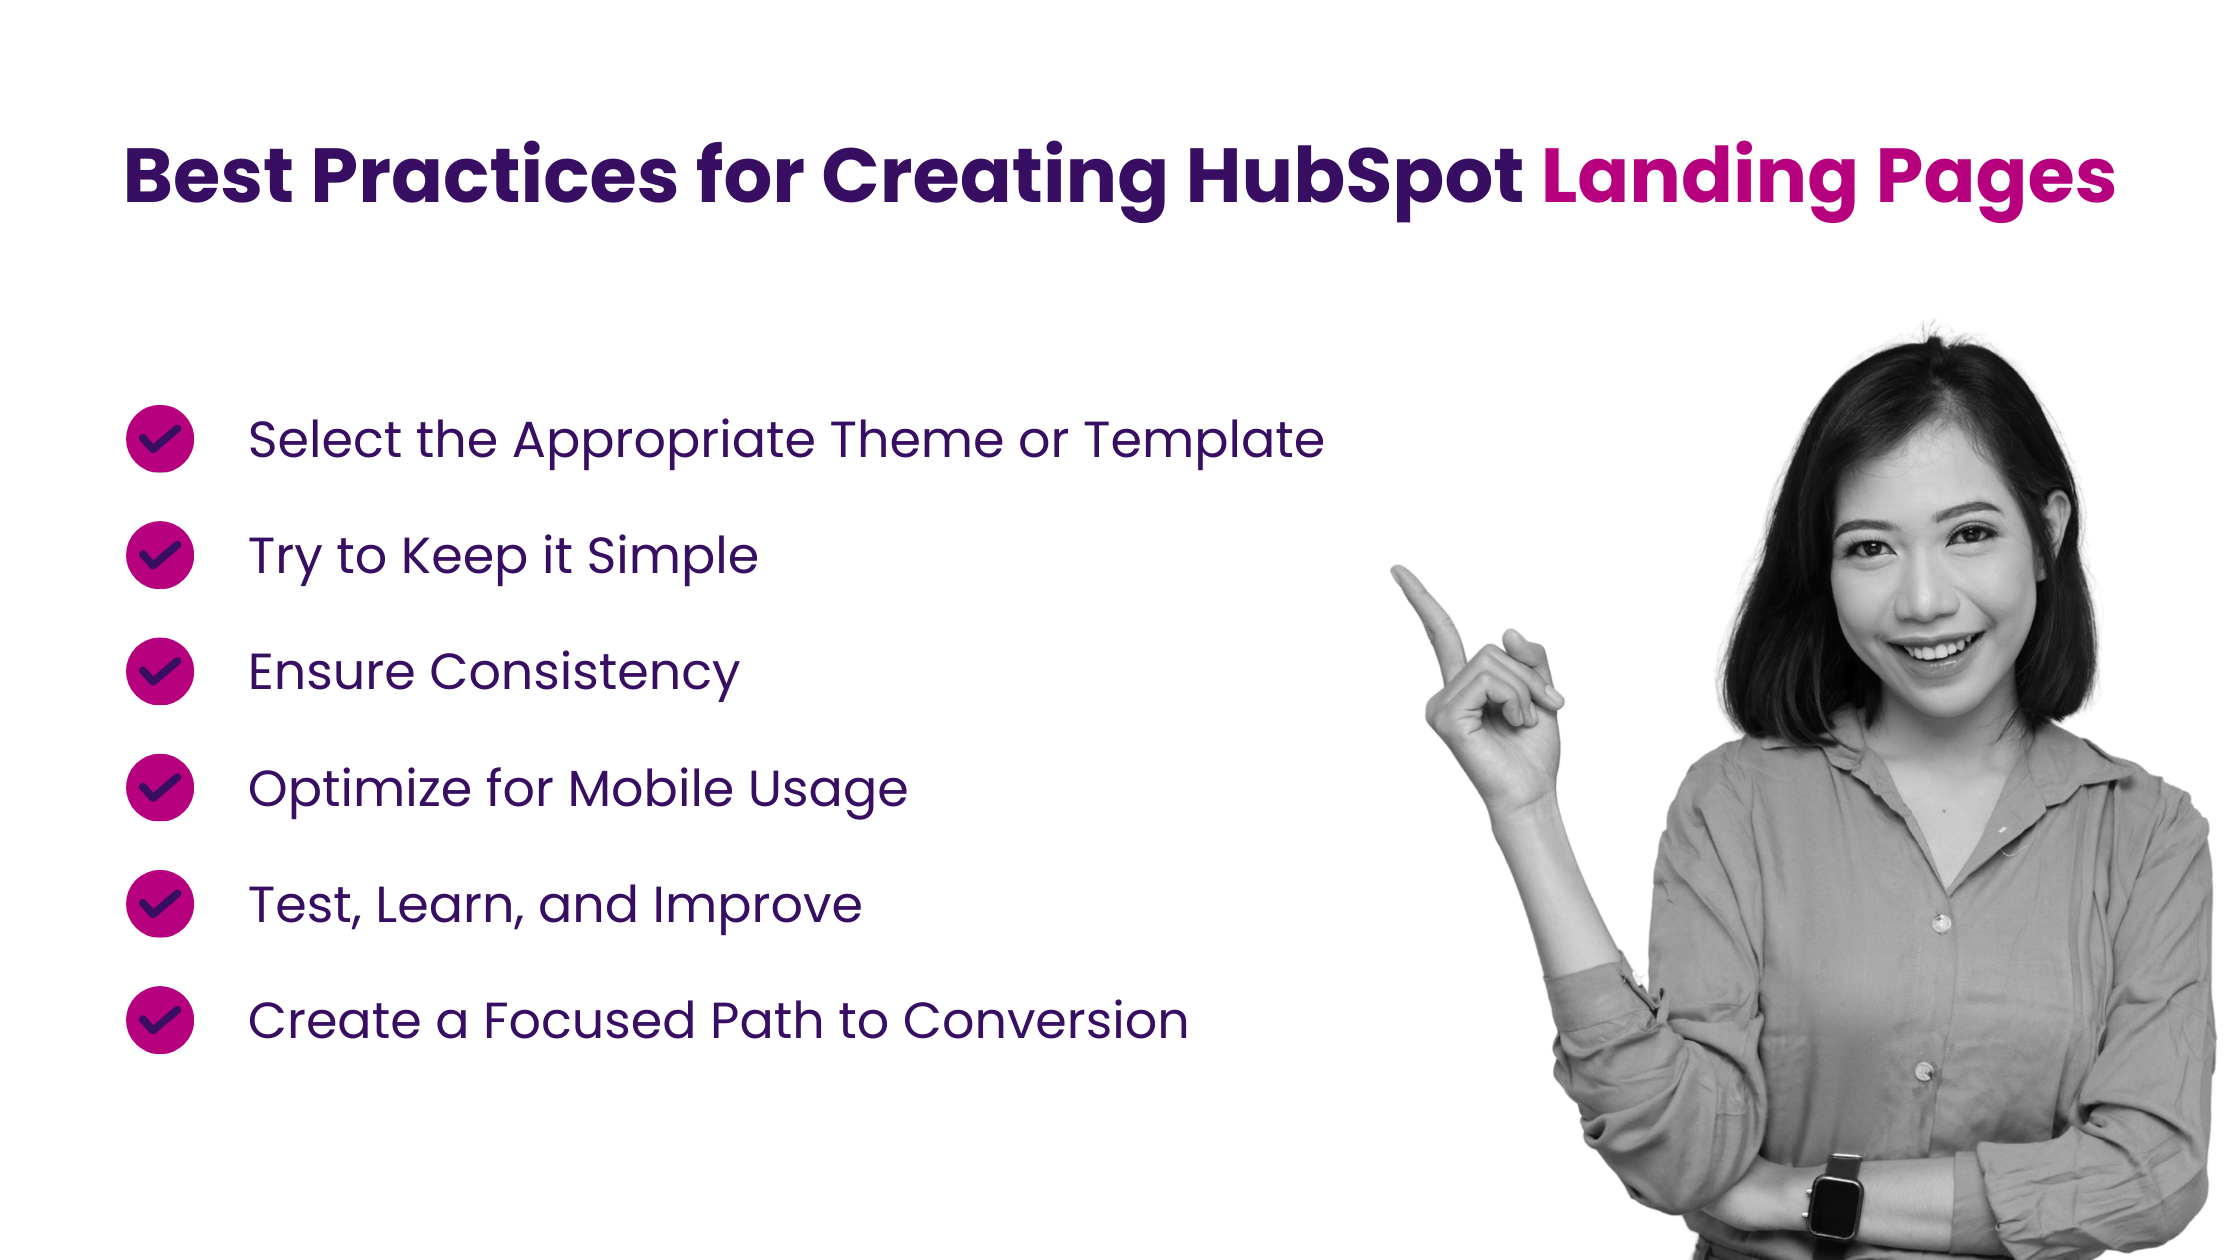 Best Practices for Creating HubSpot Landing Pages 